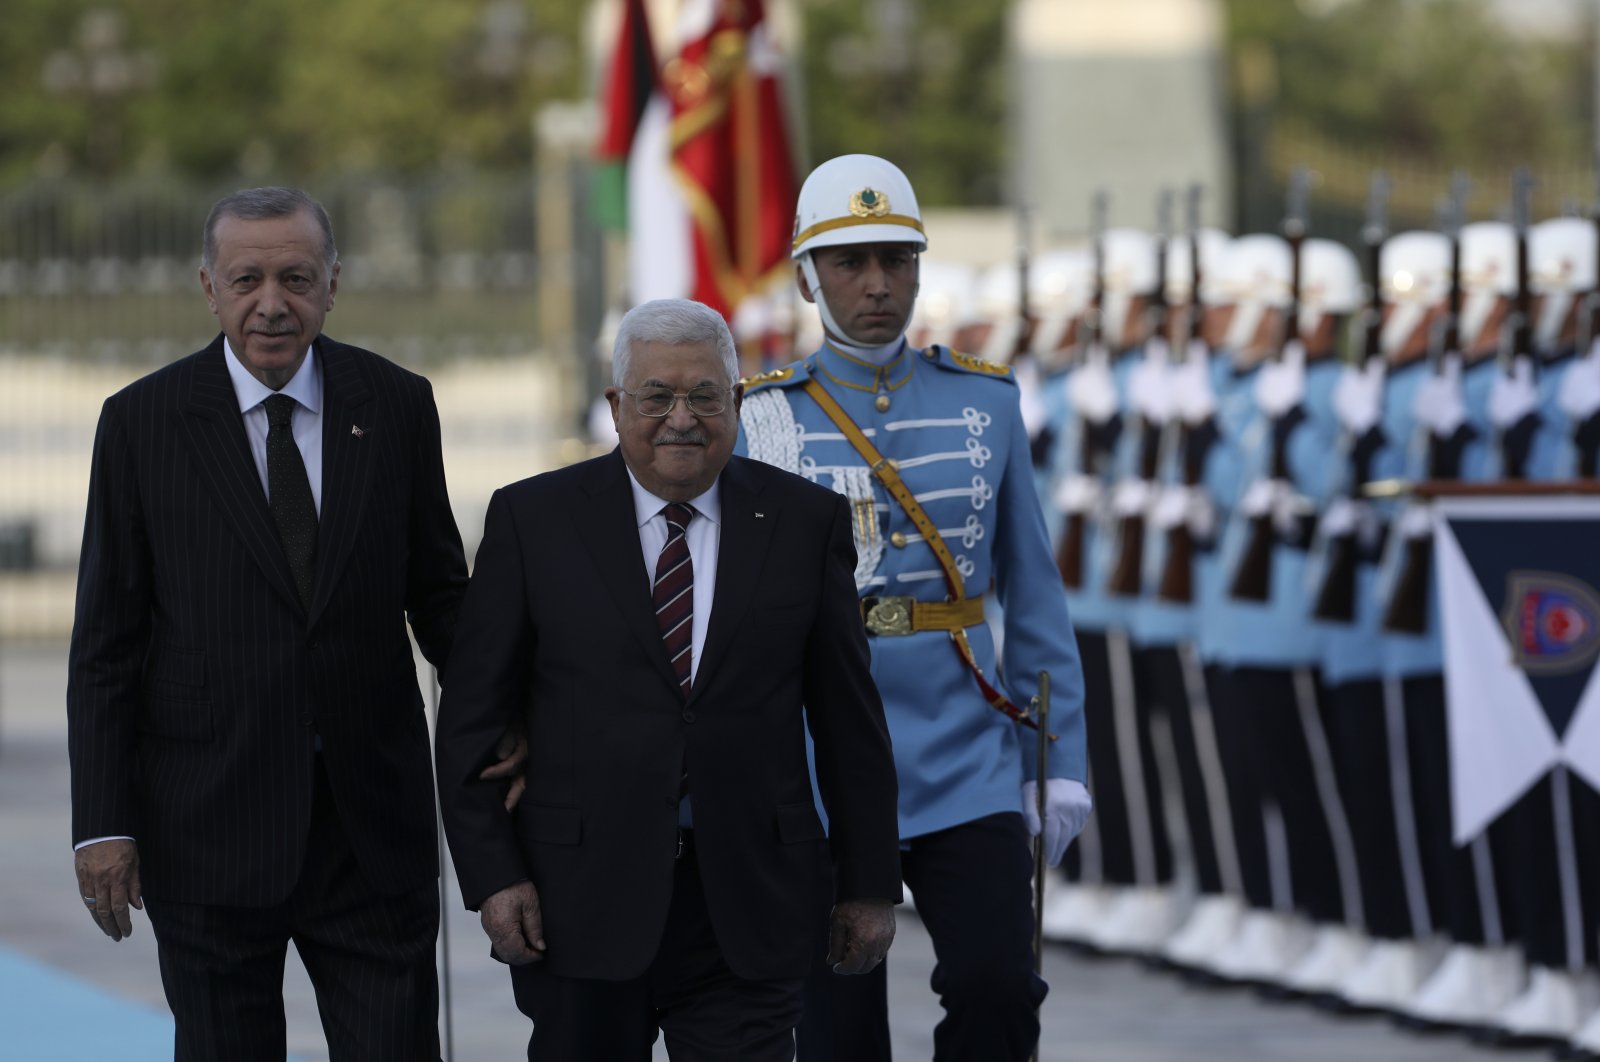 President Recep Tayyip Erdoğan, left, and Palestinian President Mahmoud Abbas review a military honor guard during a welcome ceremony in Ankara, Tuesday, Aug. 23, 2022. (AP File Photo)